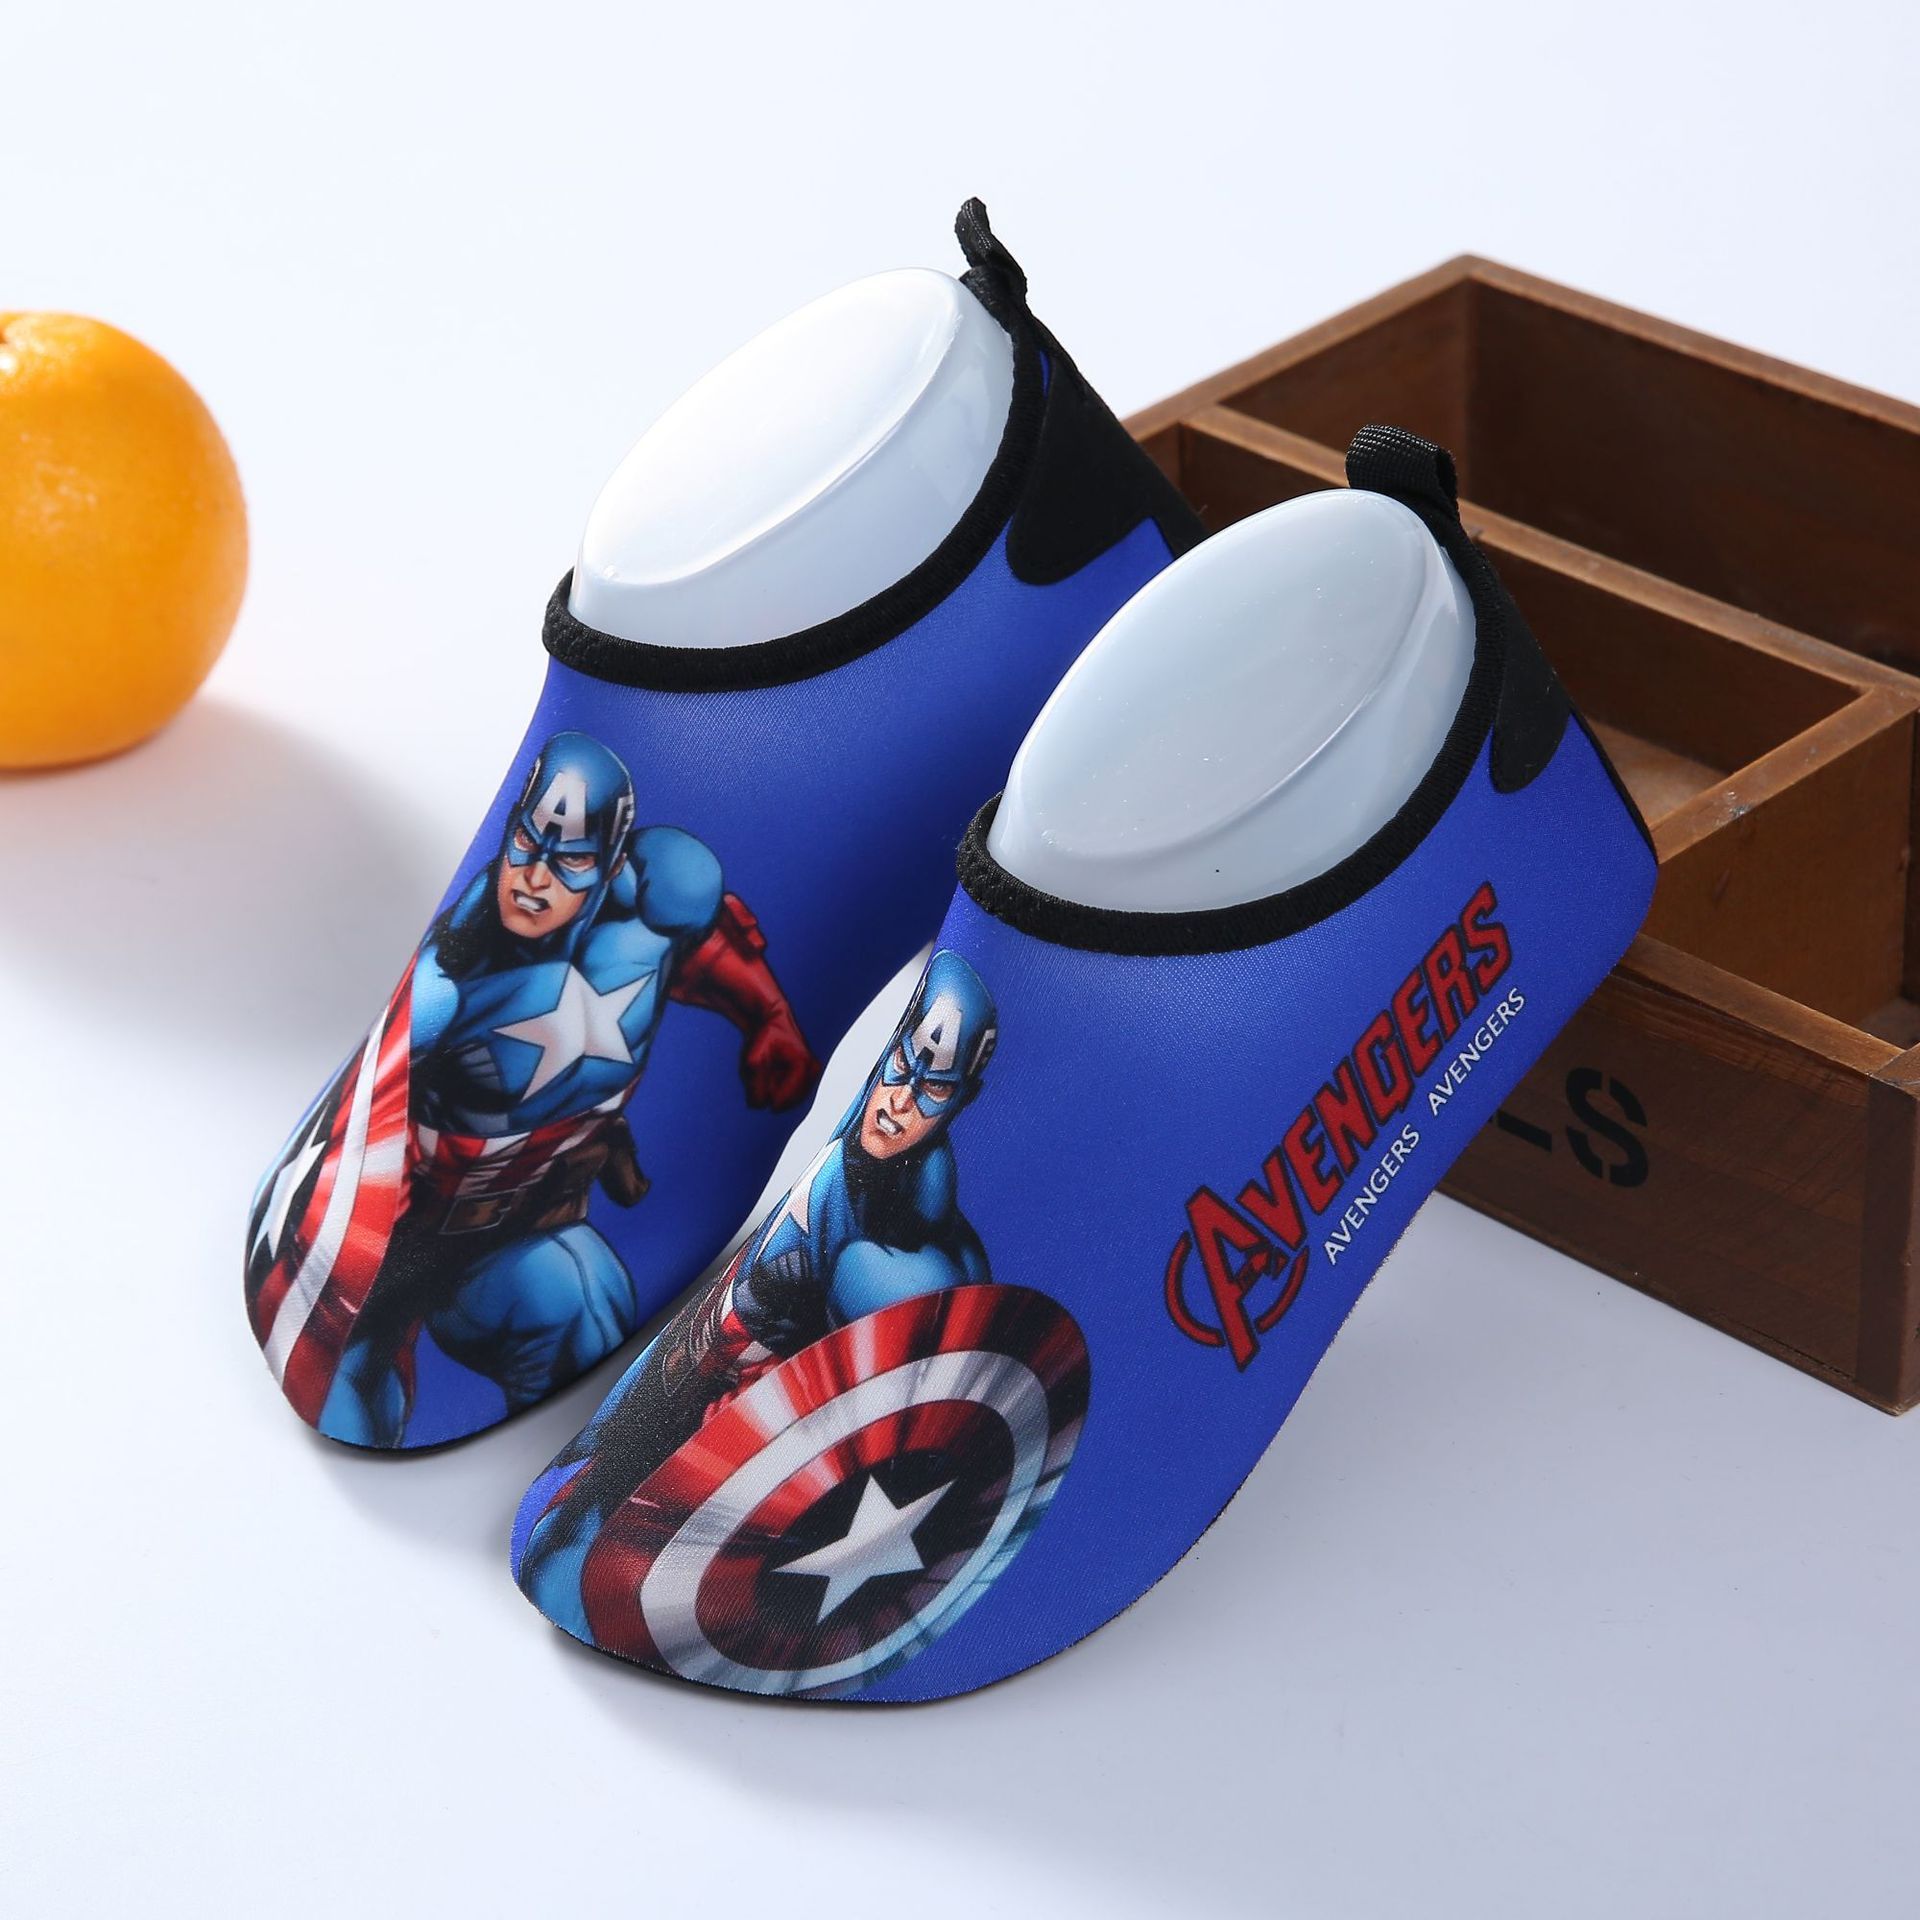 Children's floor shoes, beach casual shoes, snorkeling shoes, skin-fitting cartoon river shoes, blue Captain America